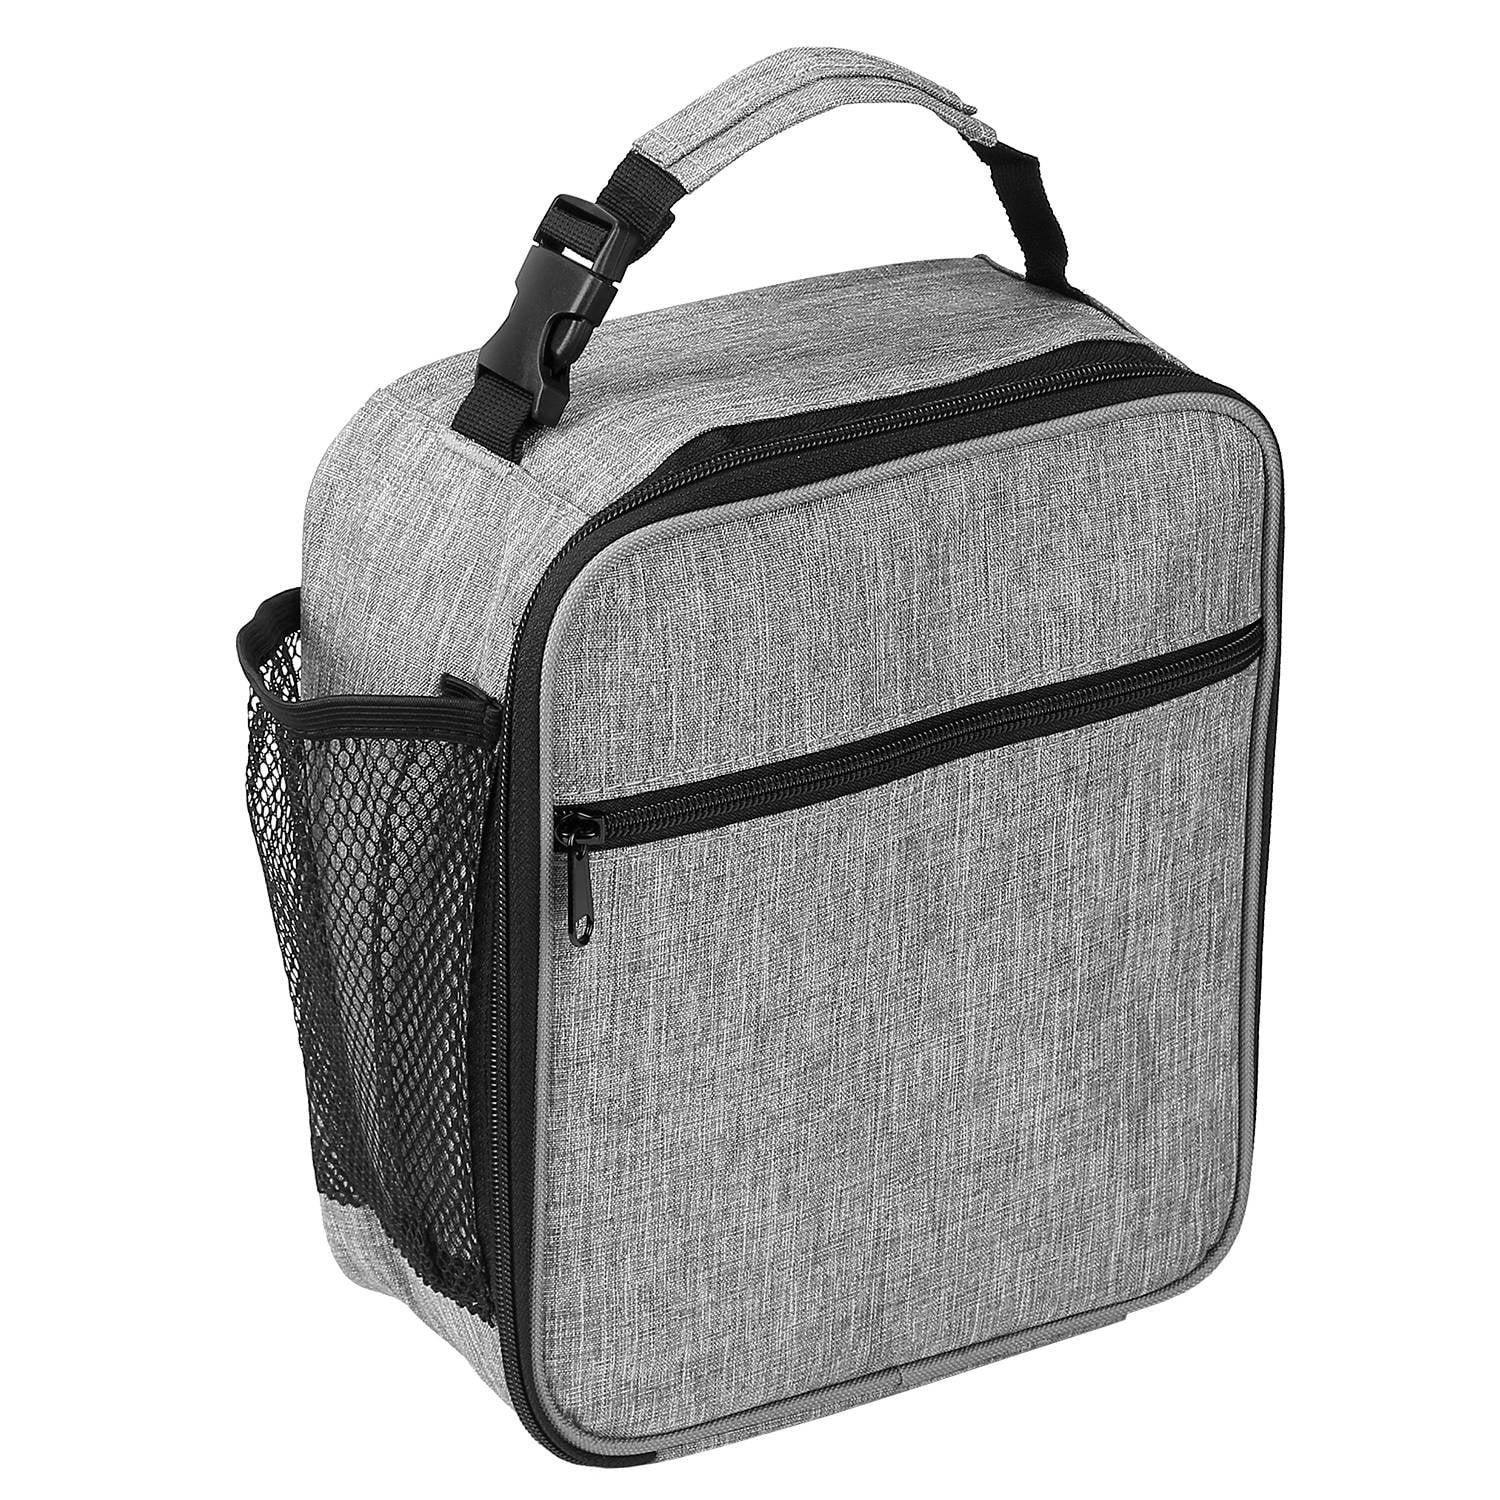 Lunch Box for Women/Men, Insulated Lunch Bag, 3.9x9.1x11.4 inch - Navy Blue Grey